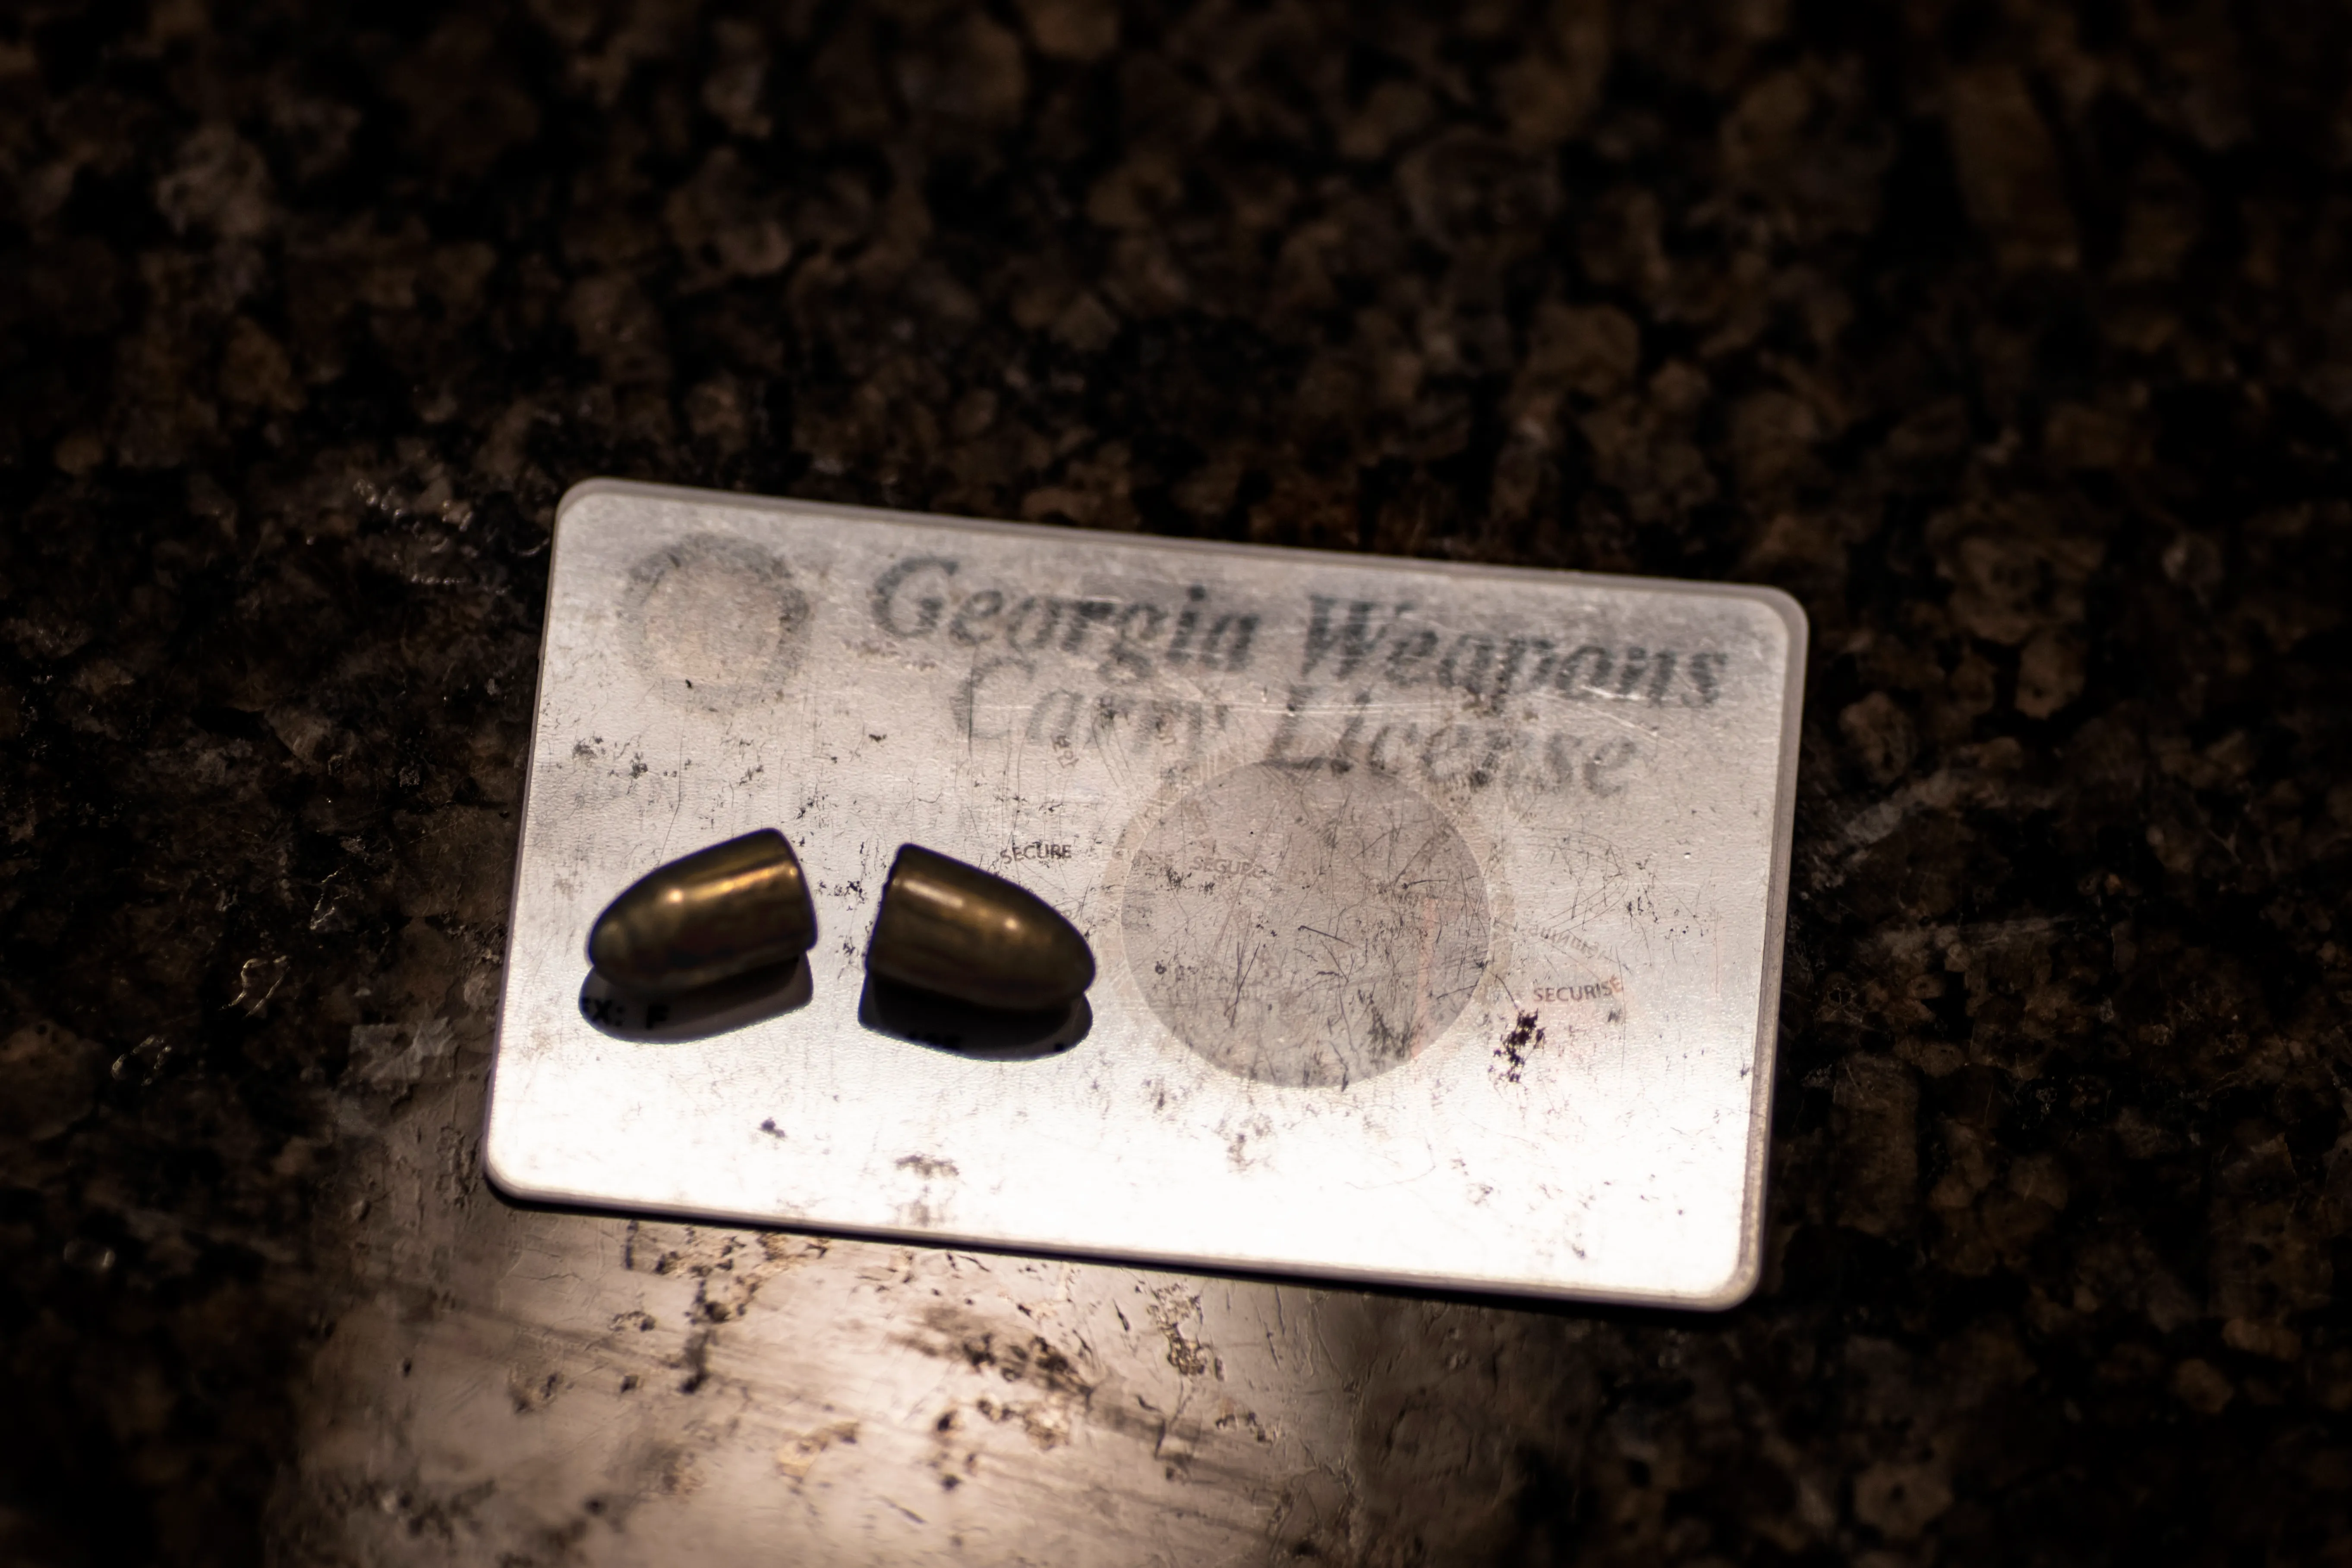 A Georgia weapons carry license with 2 bullets.